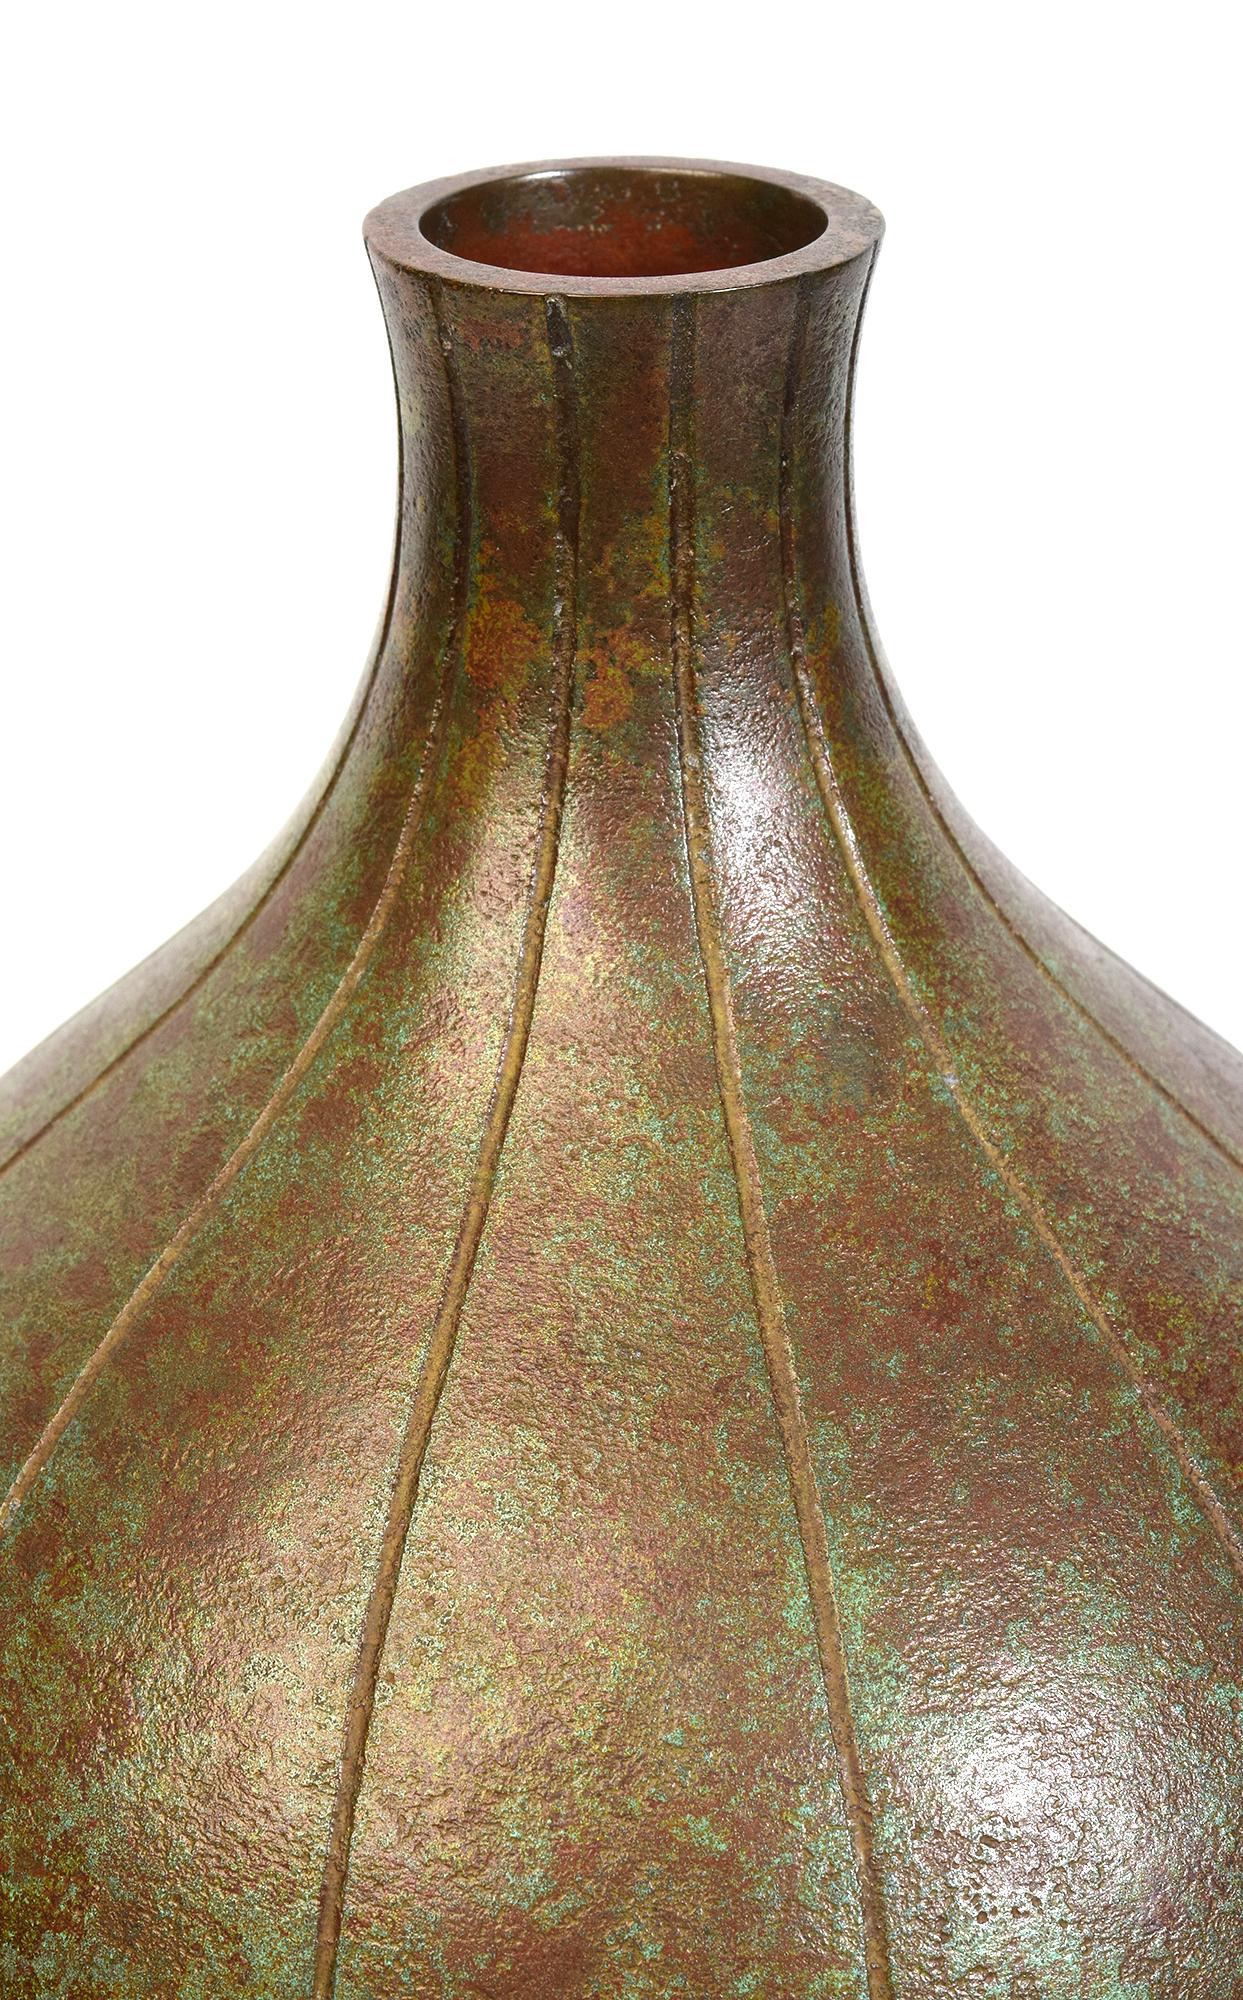 Large Japanese bronze vase in gourd shape with artist sign.
Artist signature is on the last photo.

Age: Japan, Showa Period, Early 20th Century
Size: Height 32.8 C.M. / Width 14.5 C.M.
Condition: Nice condition overall.